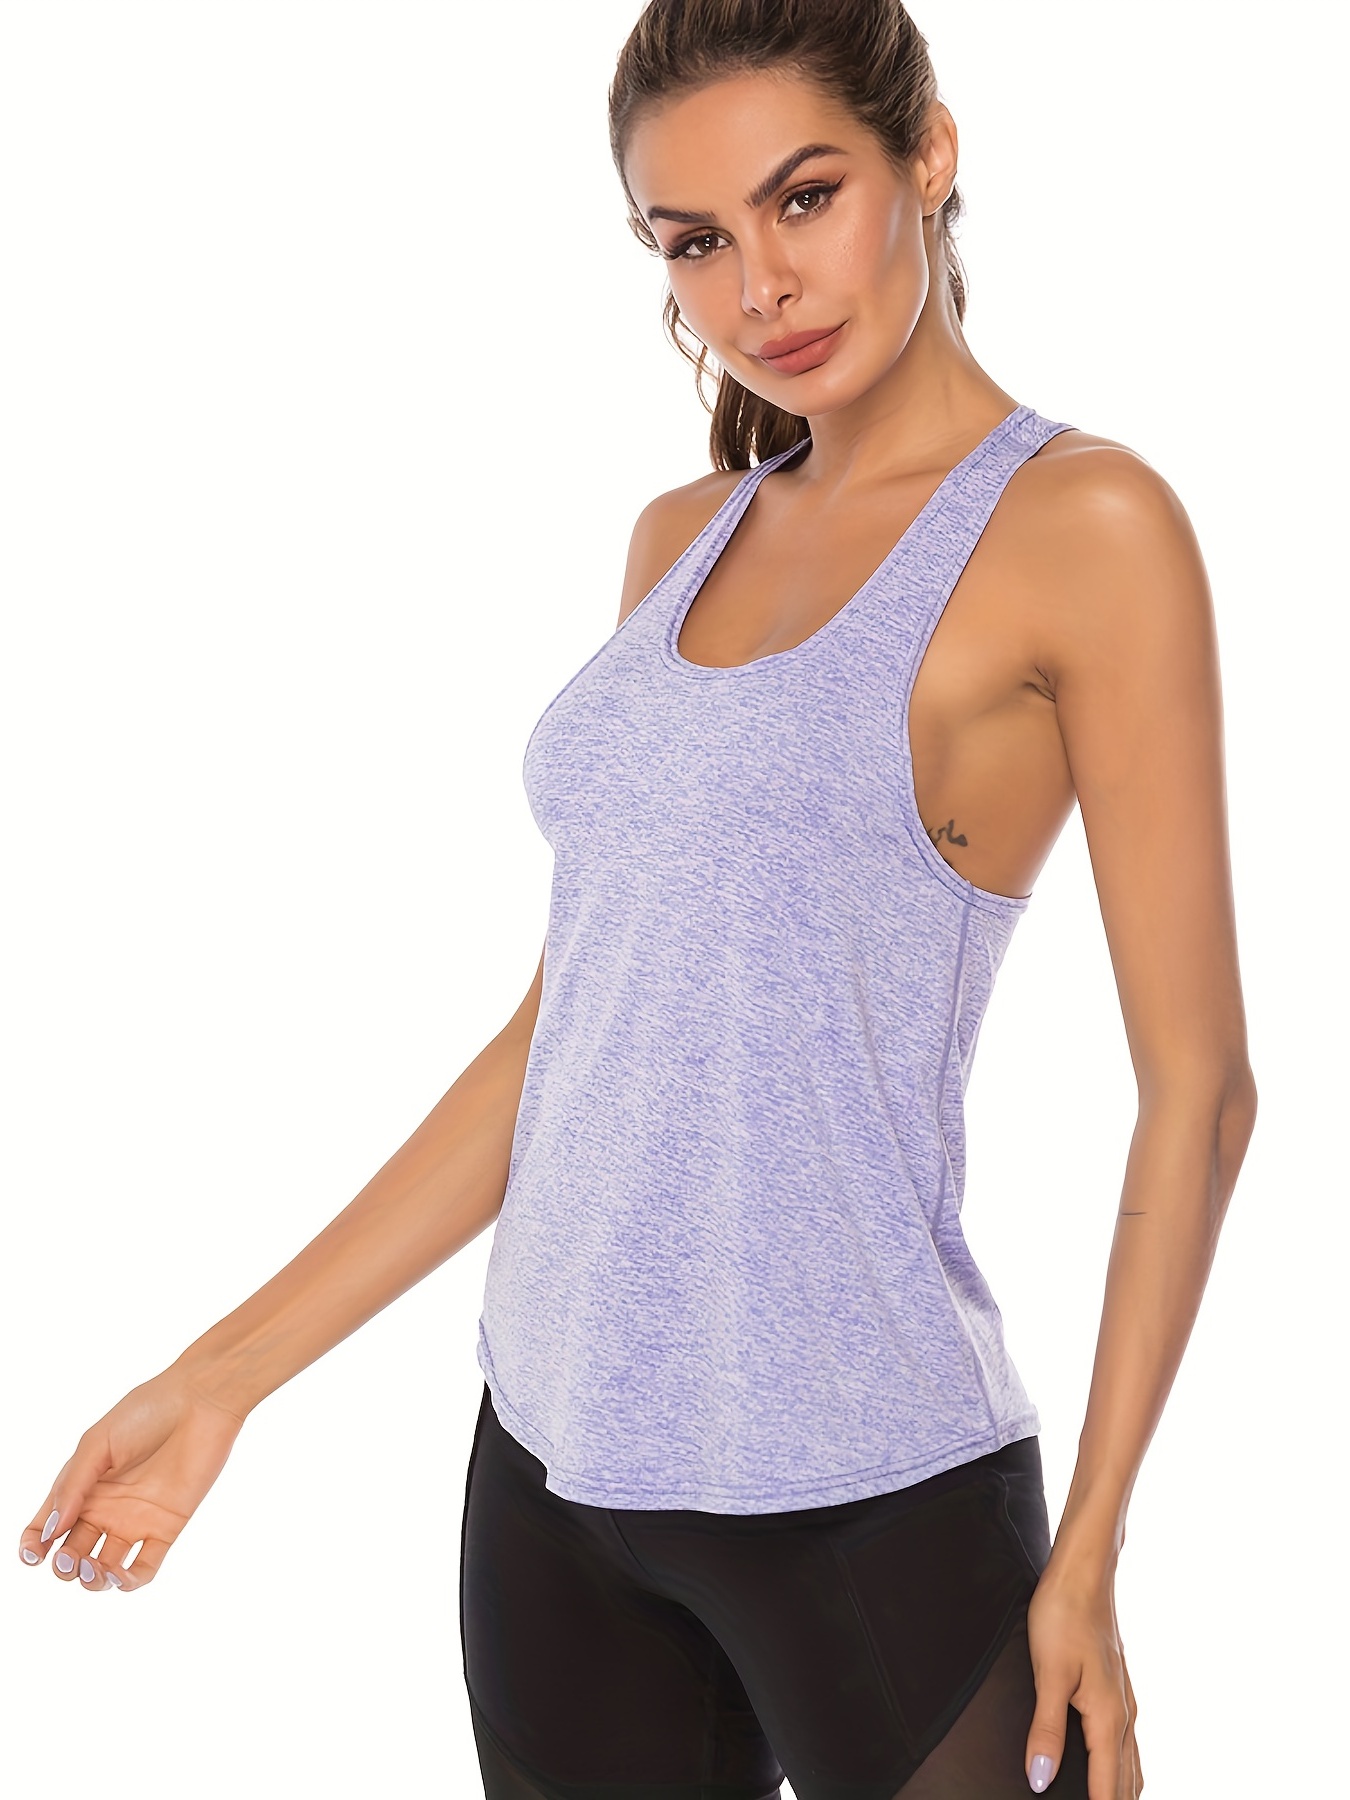 Women'S Fitted Tops Workout Tanks For Women Womens Casual Tank